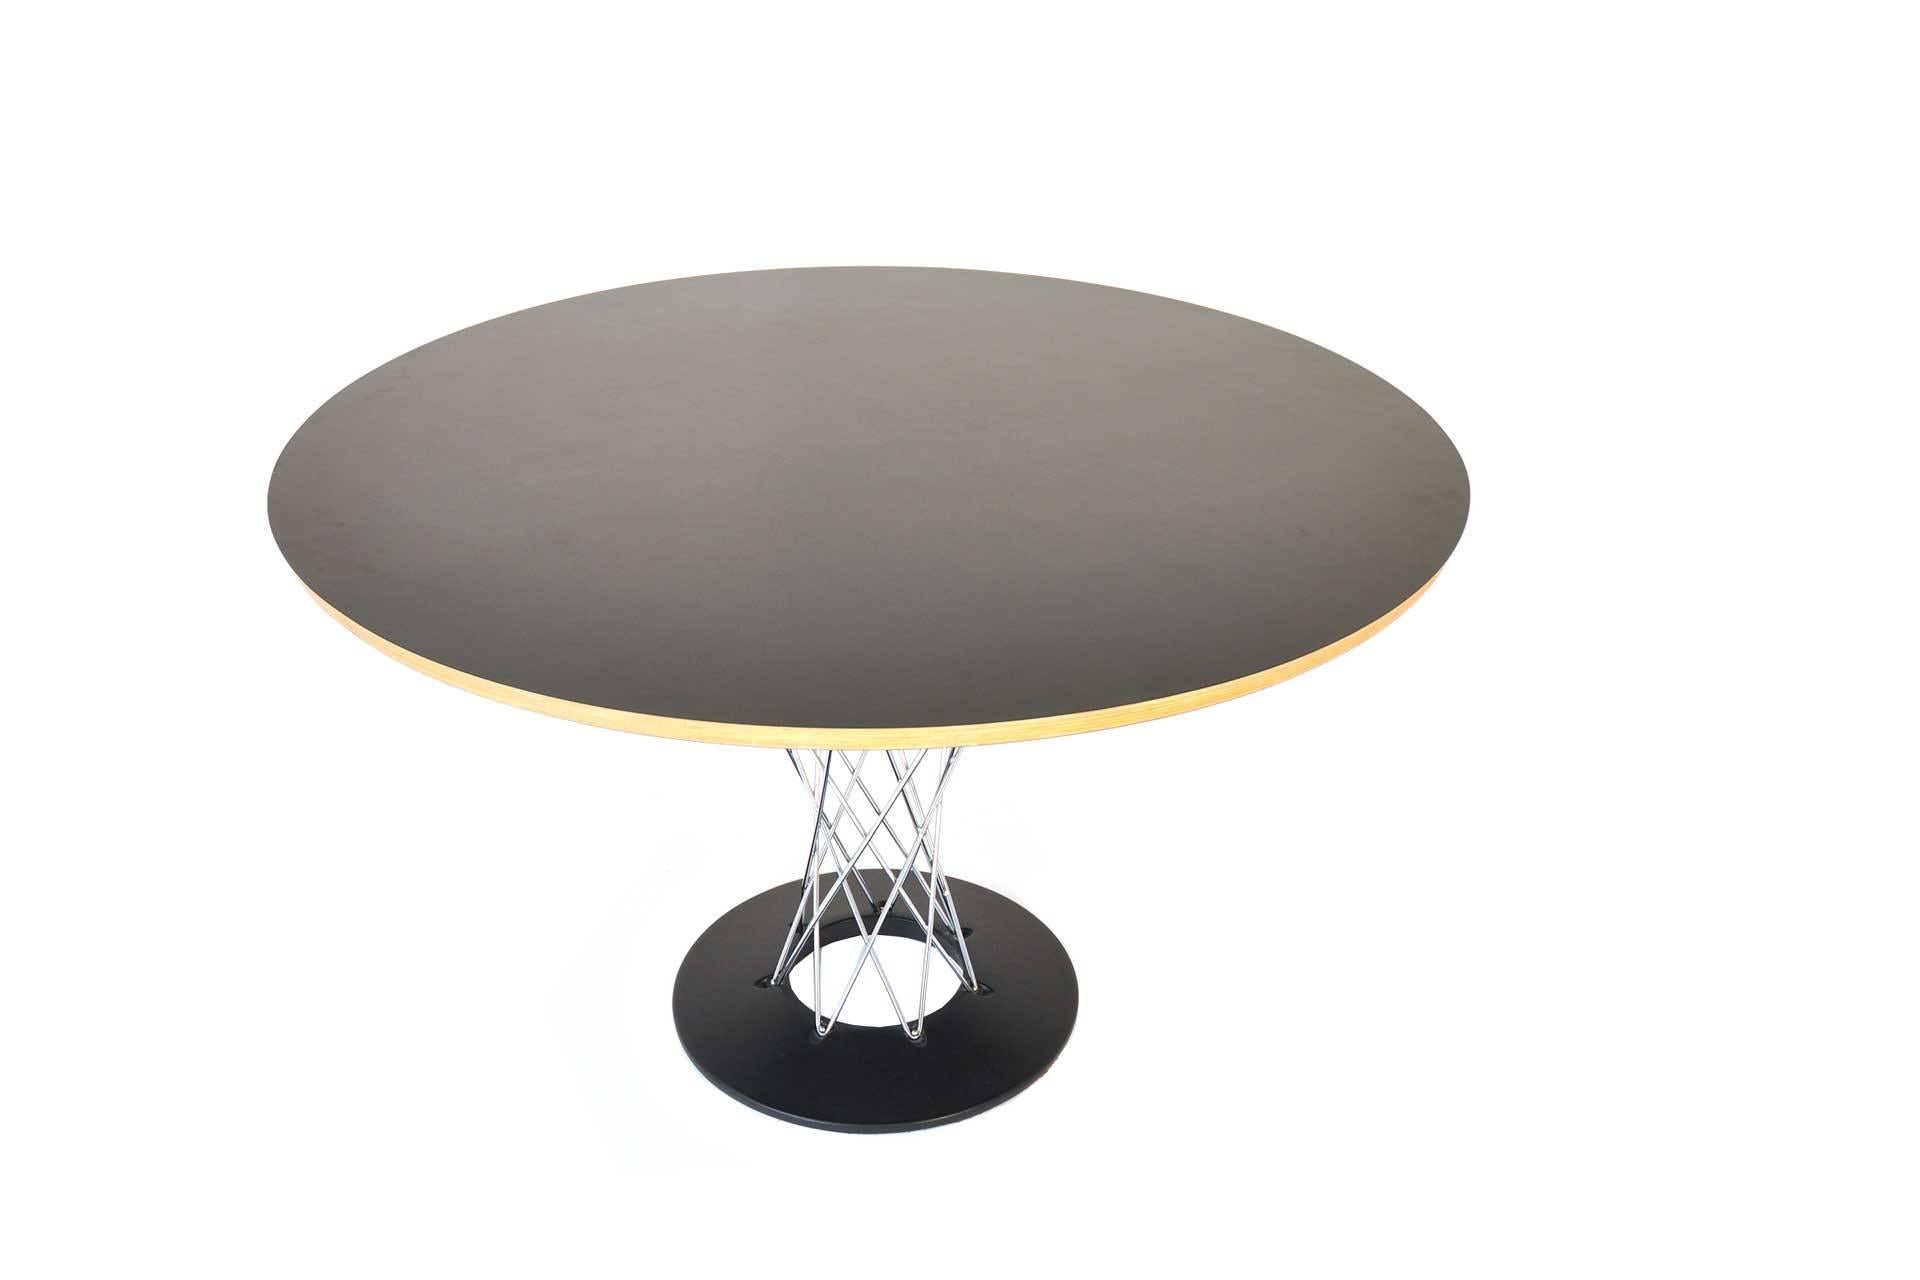 This table was designed by Isamu Noguchi in Switzerland in 1954. It was manufactured by Vitra in 1990s. The table top is made of plywood with hard covering. The feet is made of chromed steel wire and cast iron.